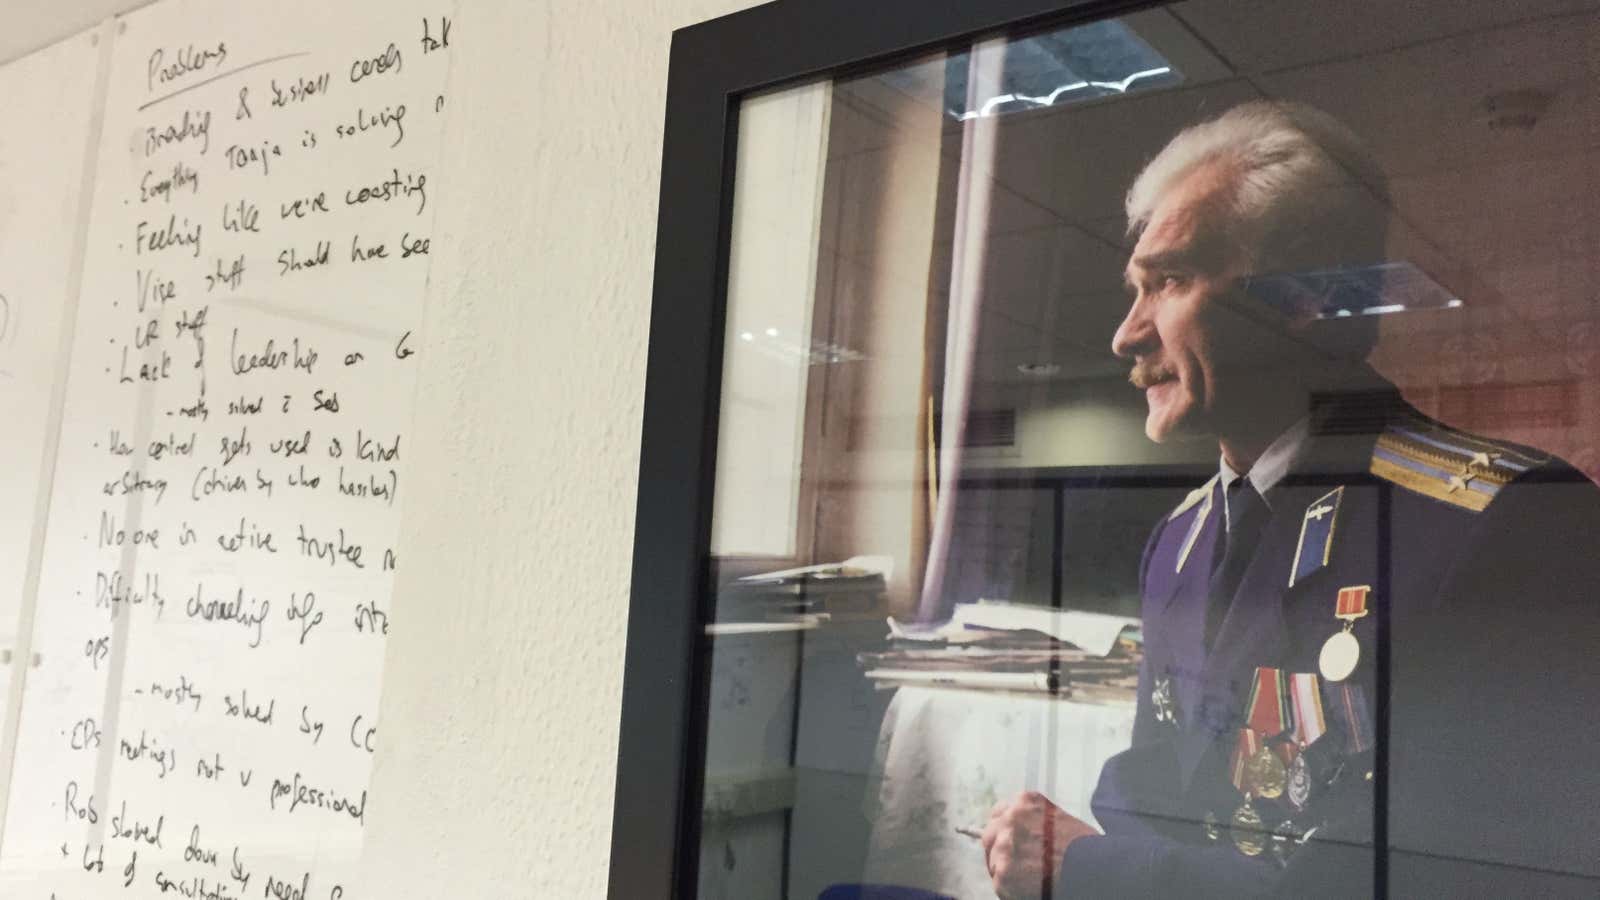 Stanislav Petrov watches over the Oxford researchers.